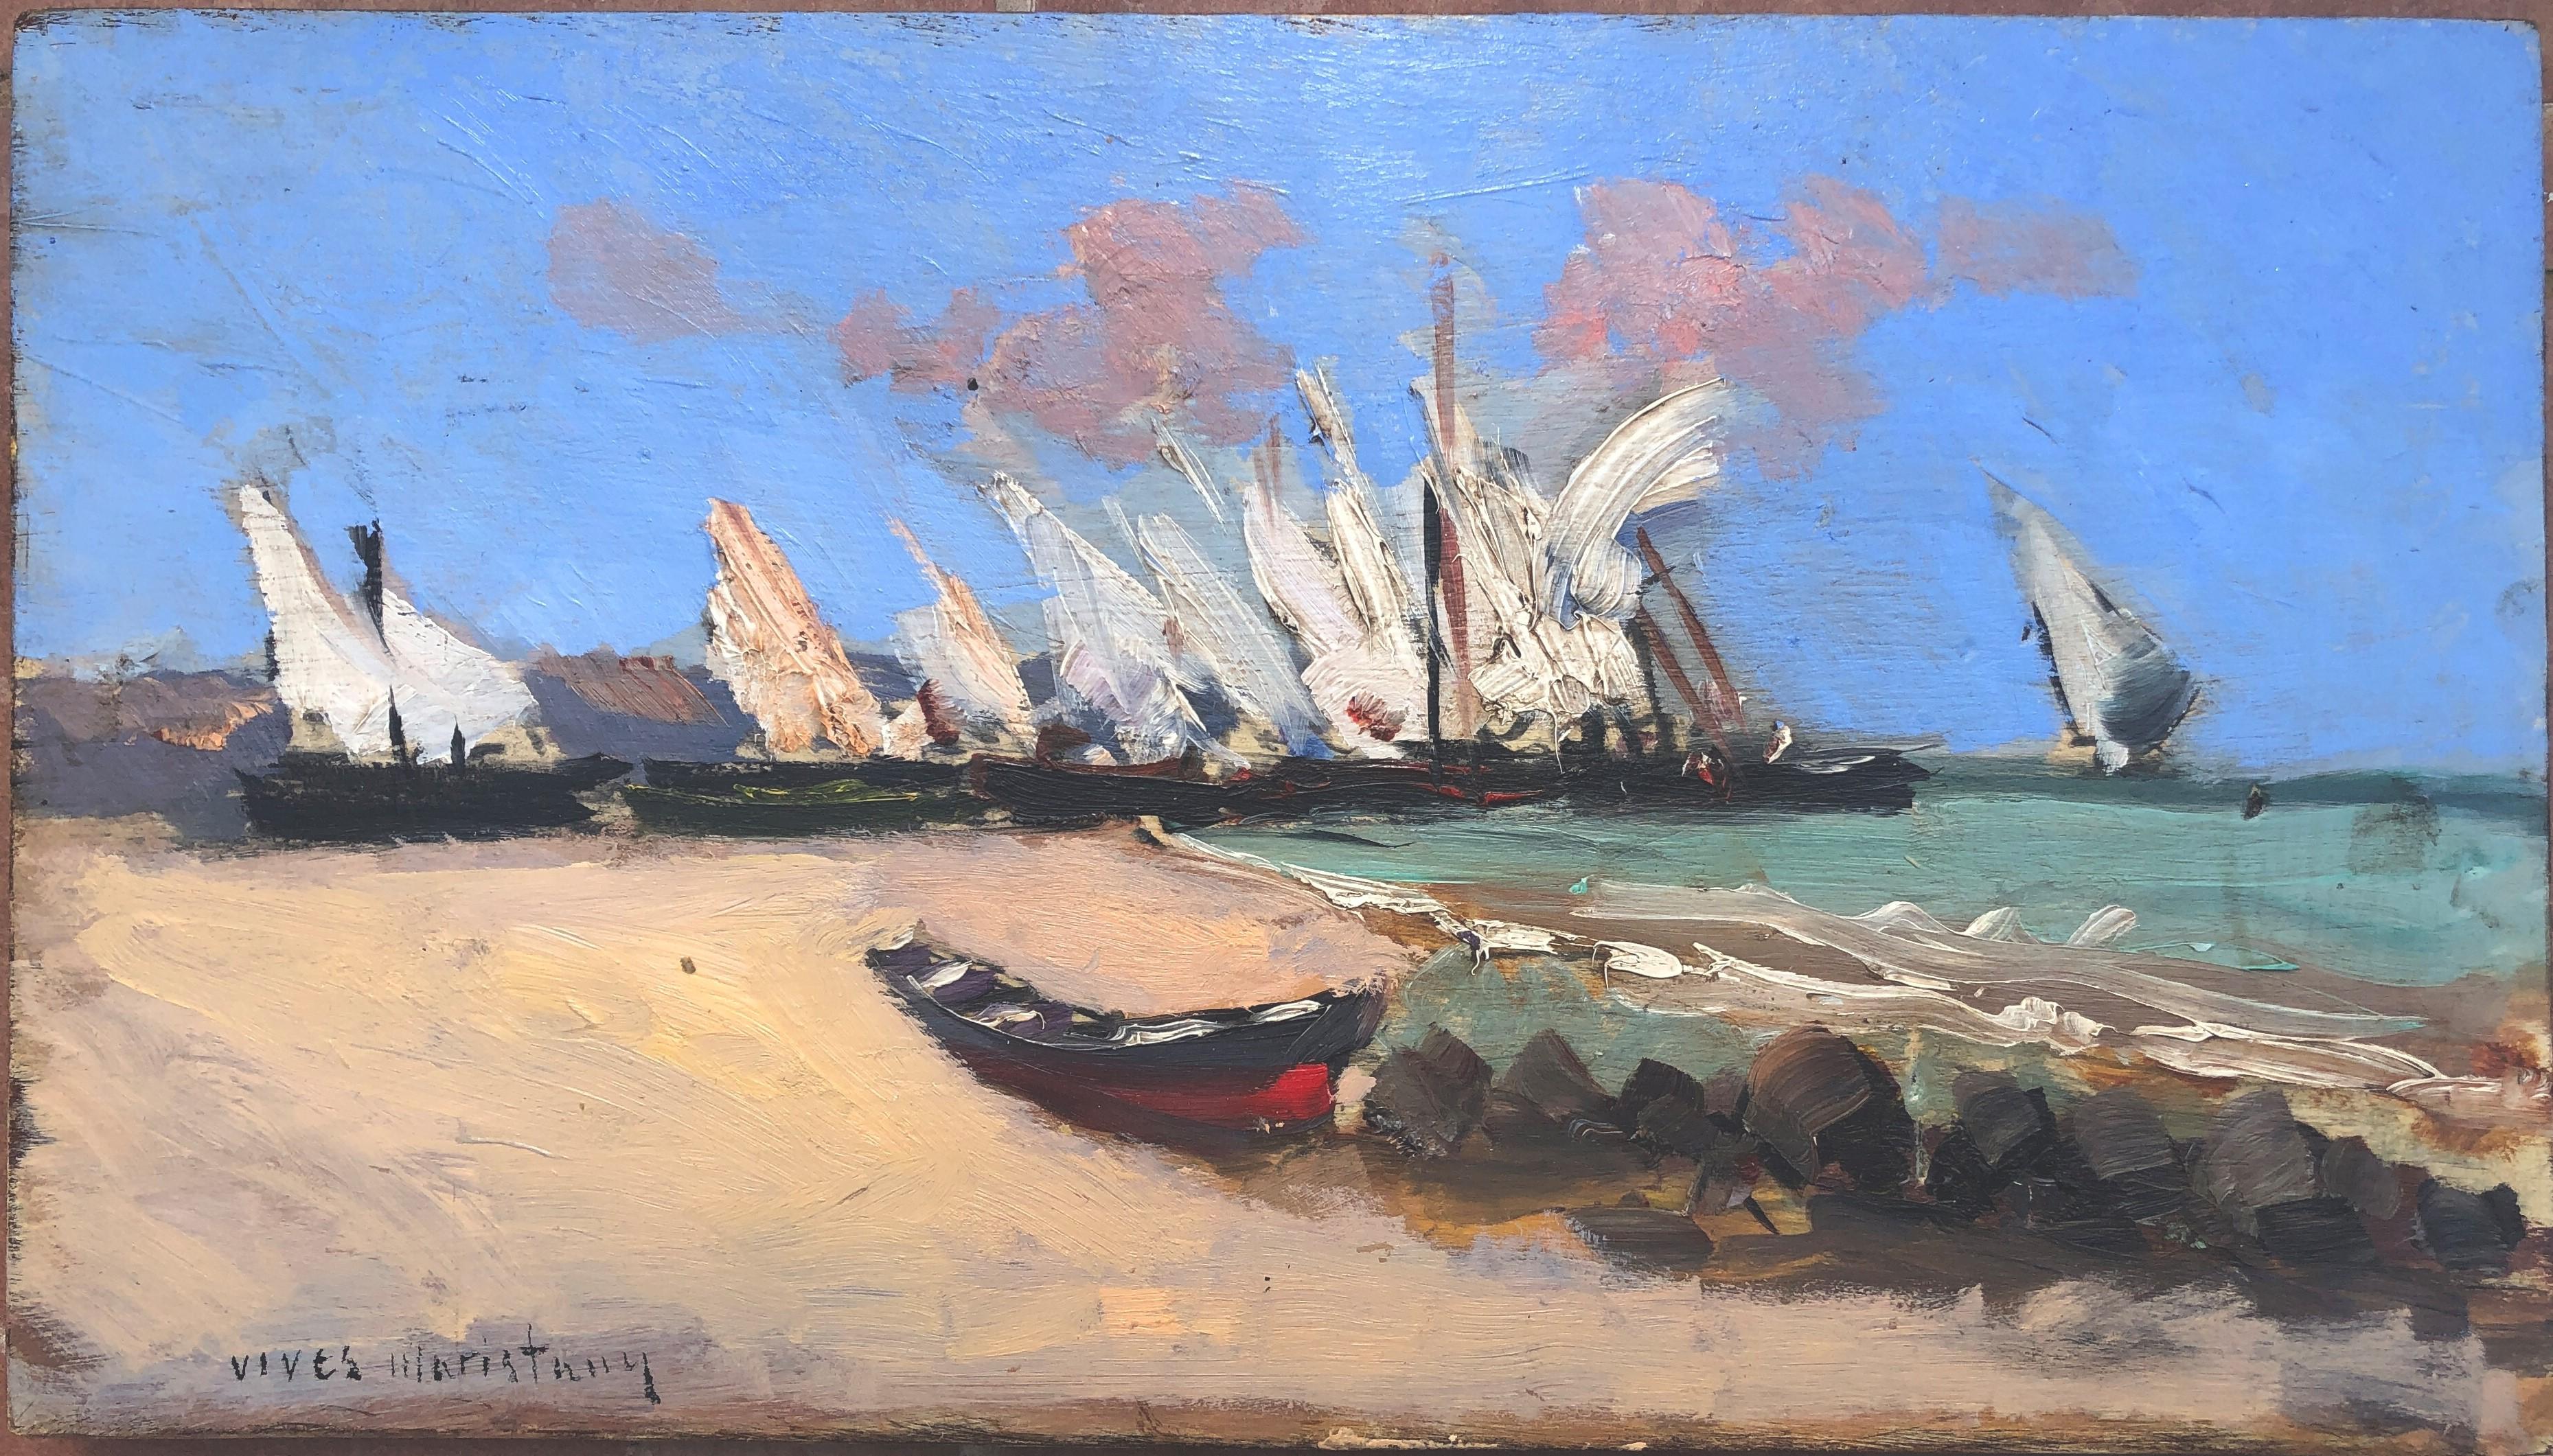 Joan Vives Maristany Landscape Painting - Boats on the beach oil on board painting impressionist seascape